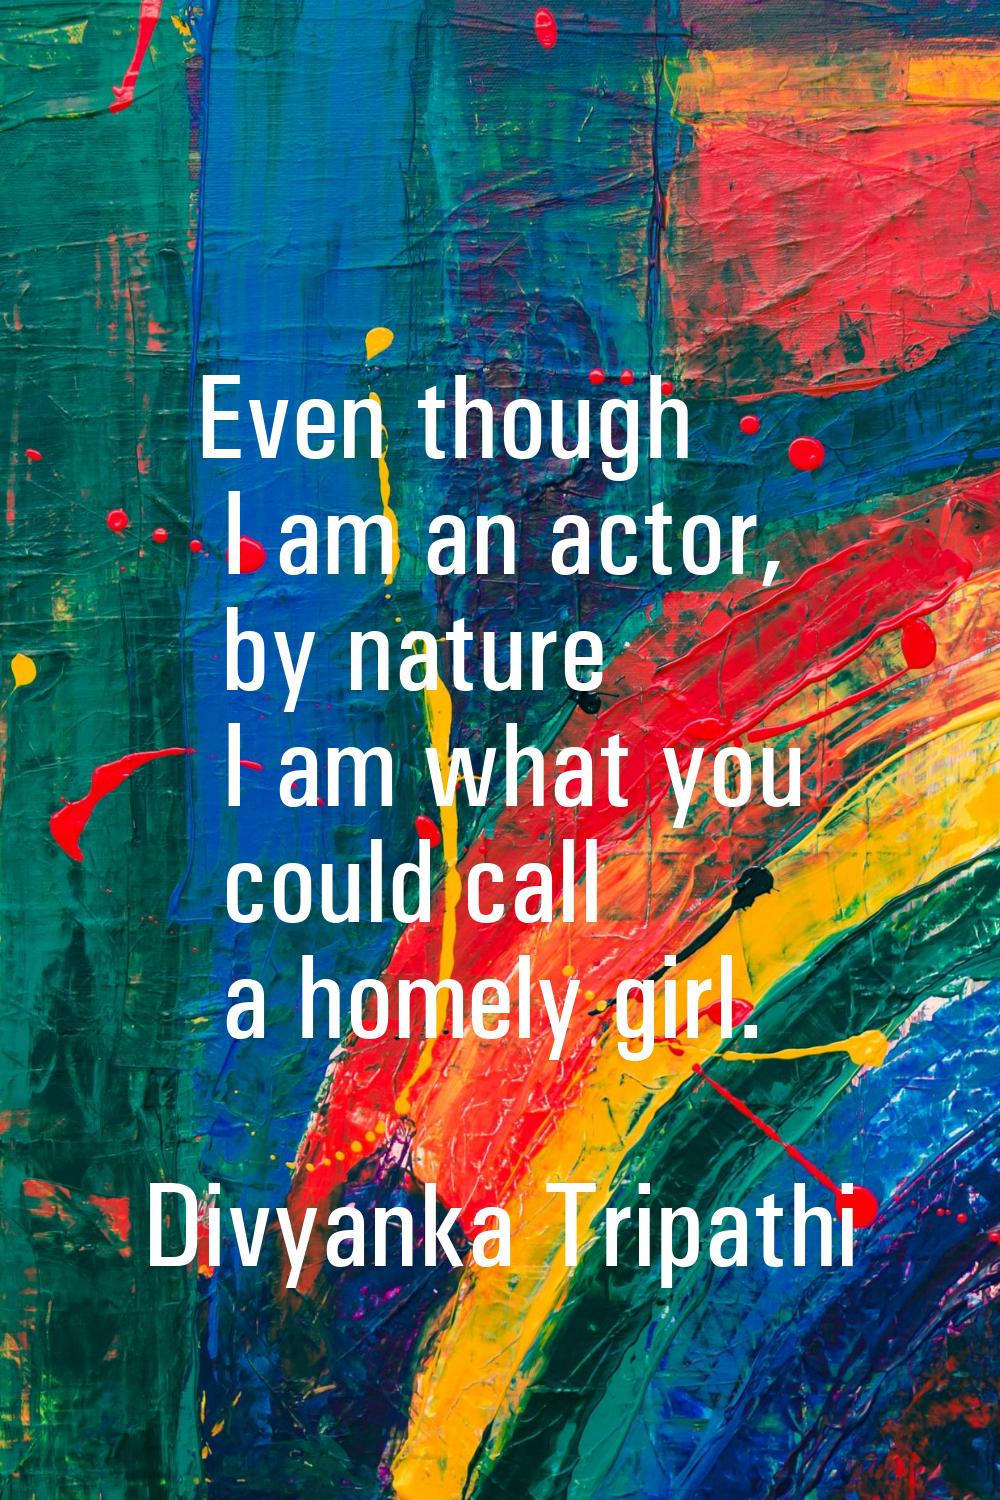 Even though I am an actor, by nature I am what you could call a homely girl.